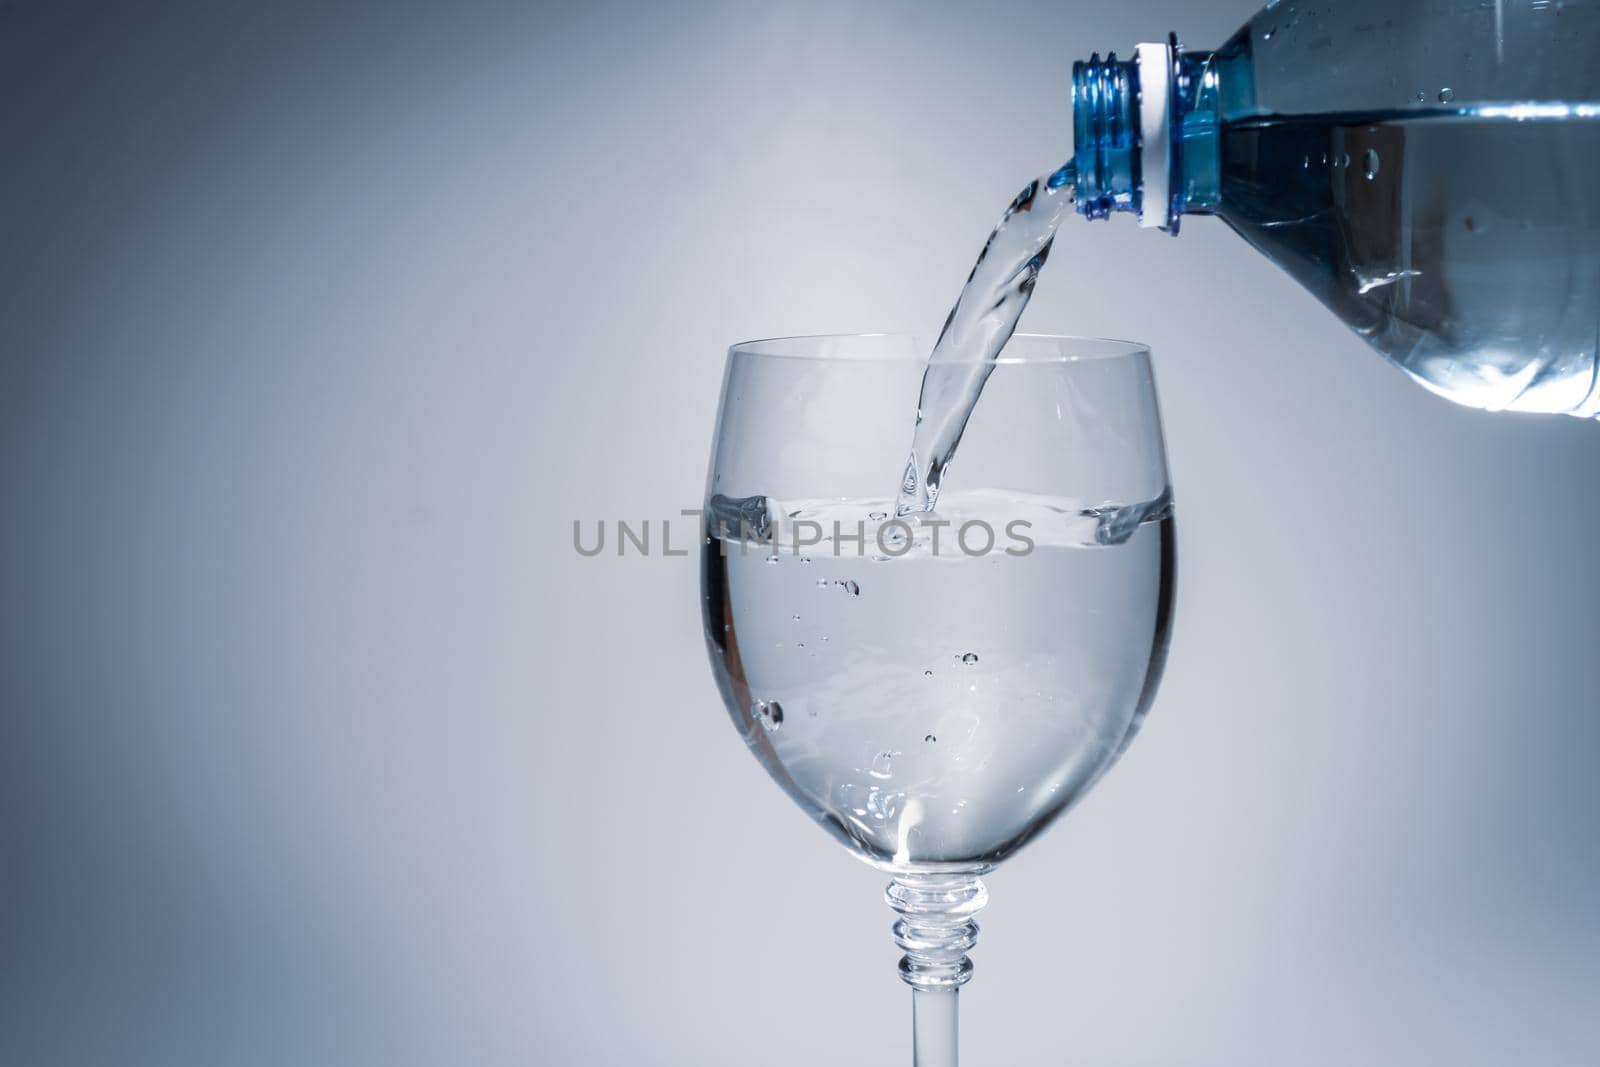 Pouring water into a glass goblet from a plastic bottle. Light contrasting background with veneering.